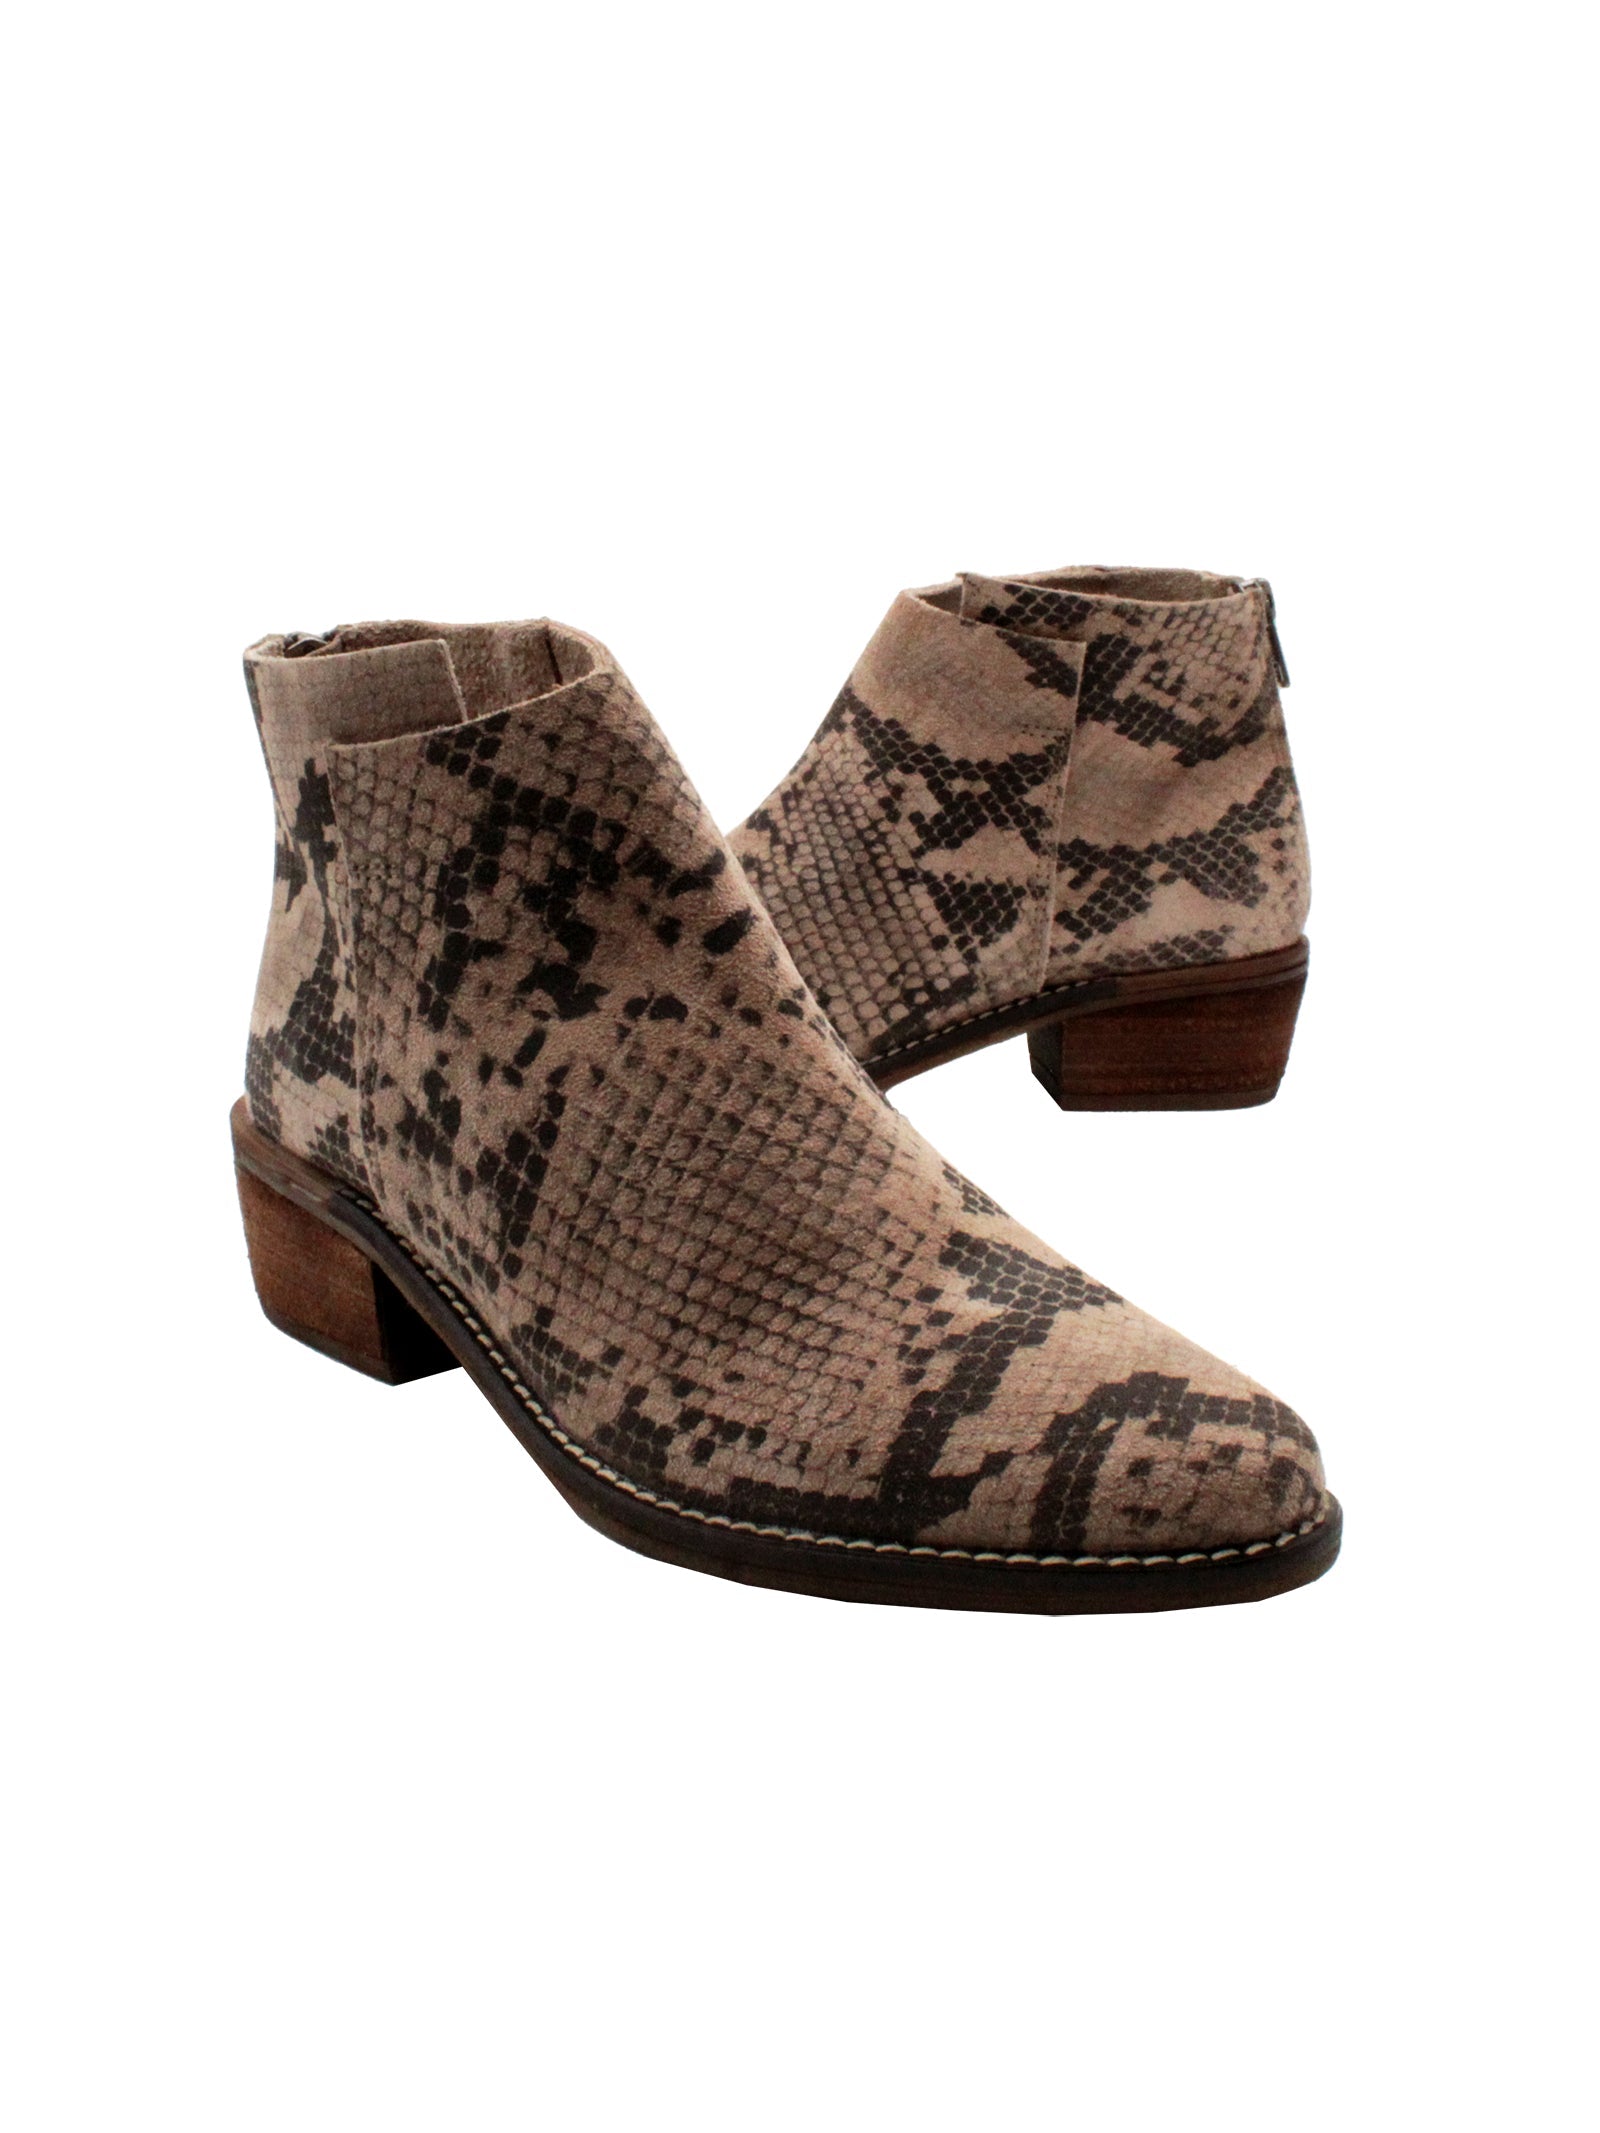 Very Volatile’s hand burnished suede ‘Aldworth’ bootie taupe multi has an asymmetrical topline that adds effortless appeal to this wardrobe essential. Featuring padded insoles set atop sturdy rubber outsoles with stack leather heels and rustic stitched leather welting. 3/4 view angle